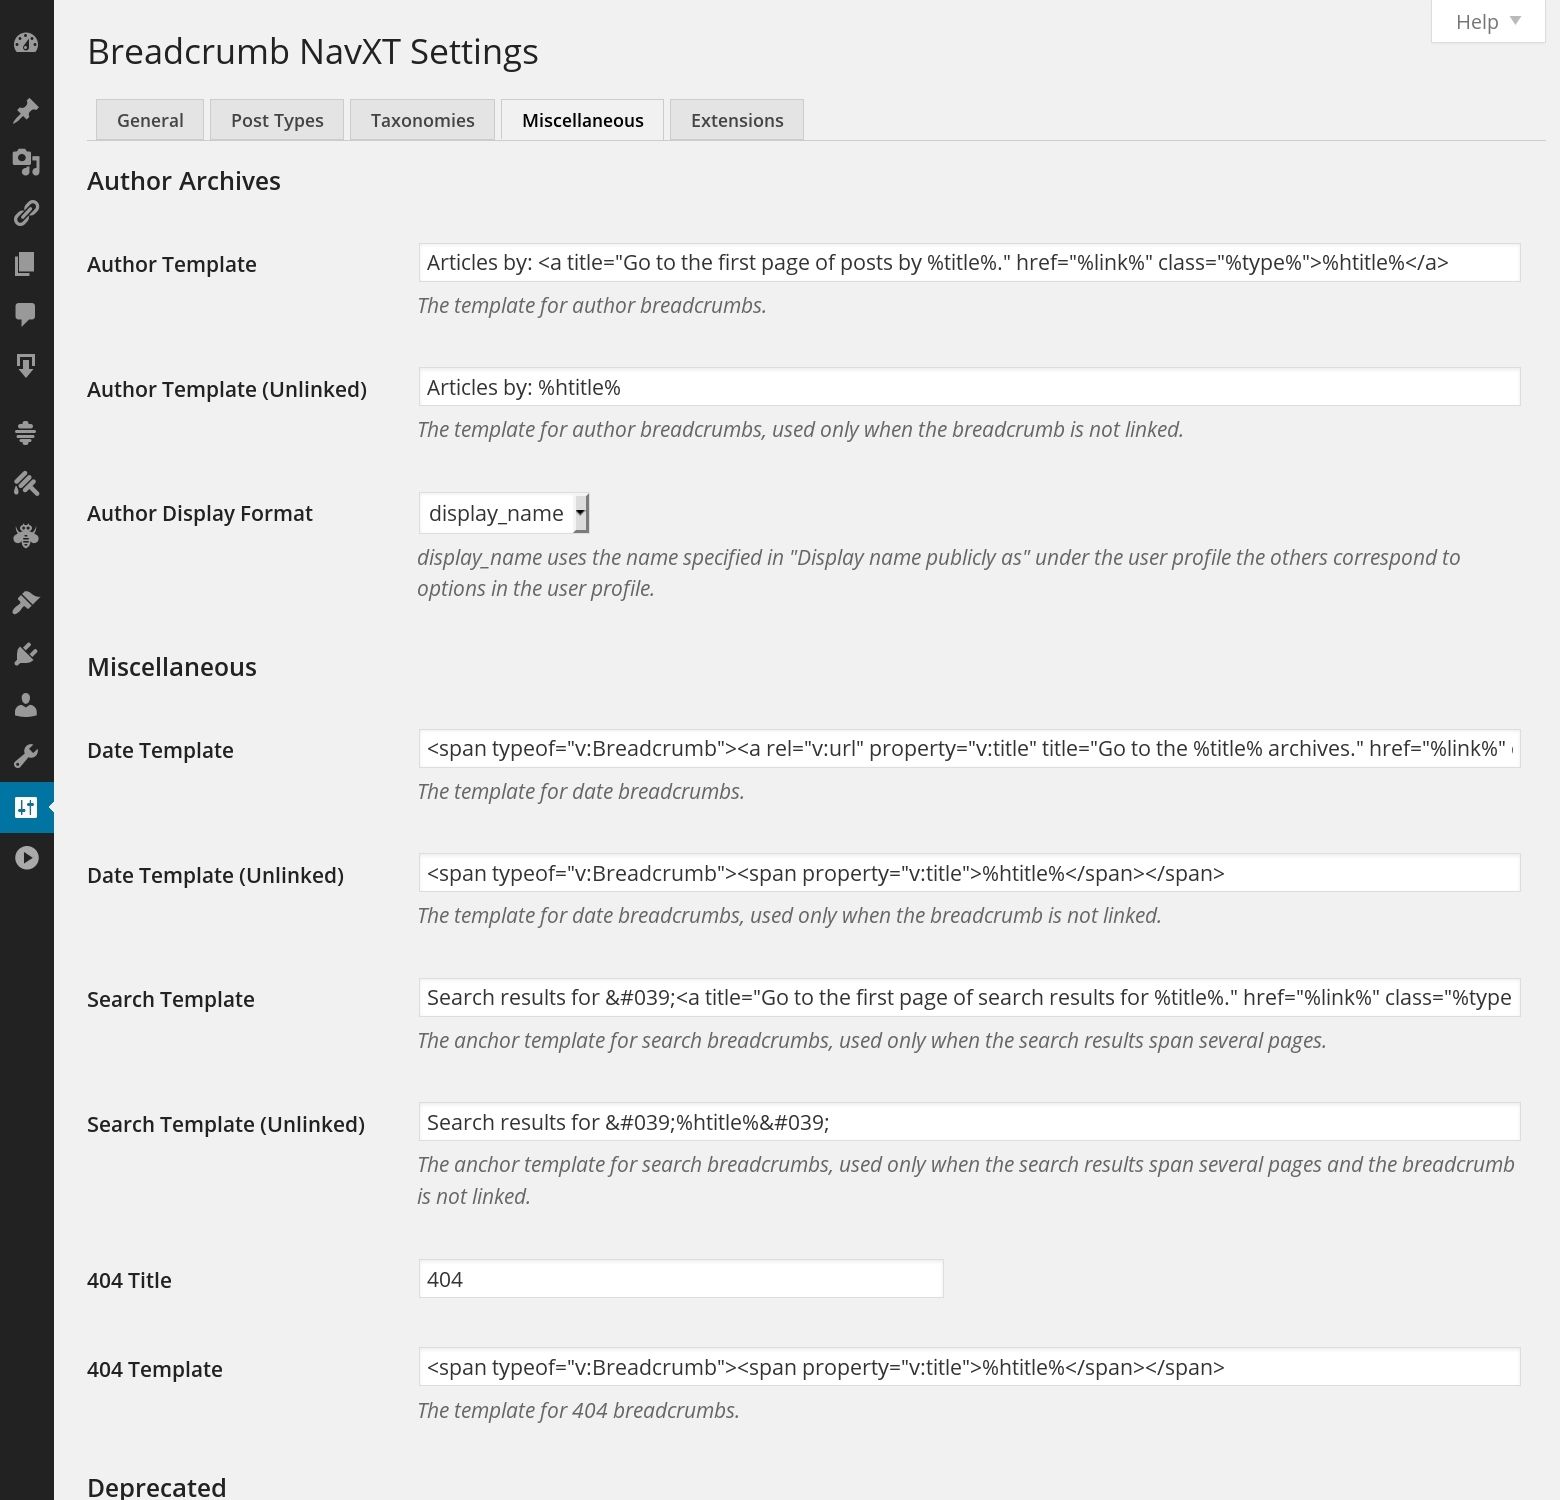 Sample screenshot of the miscellaneous tab from the Breadcrumb NavXT download page.